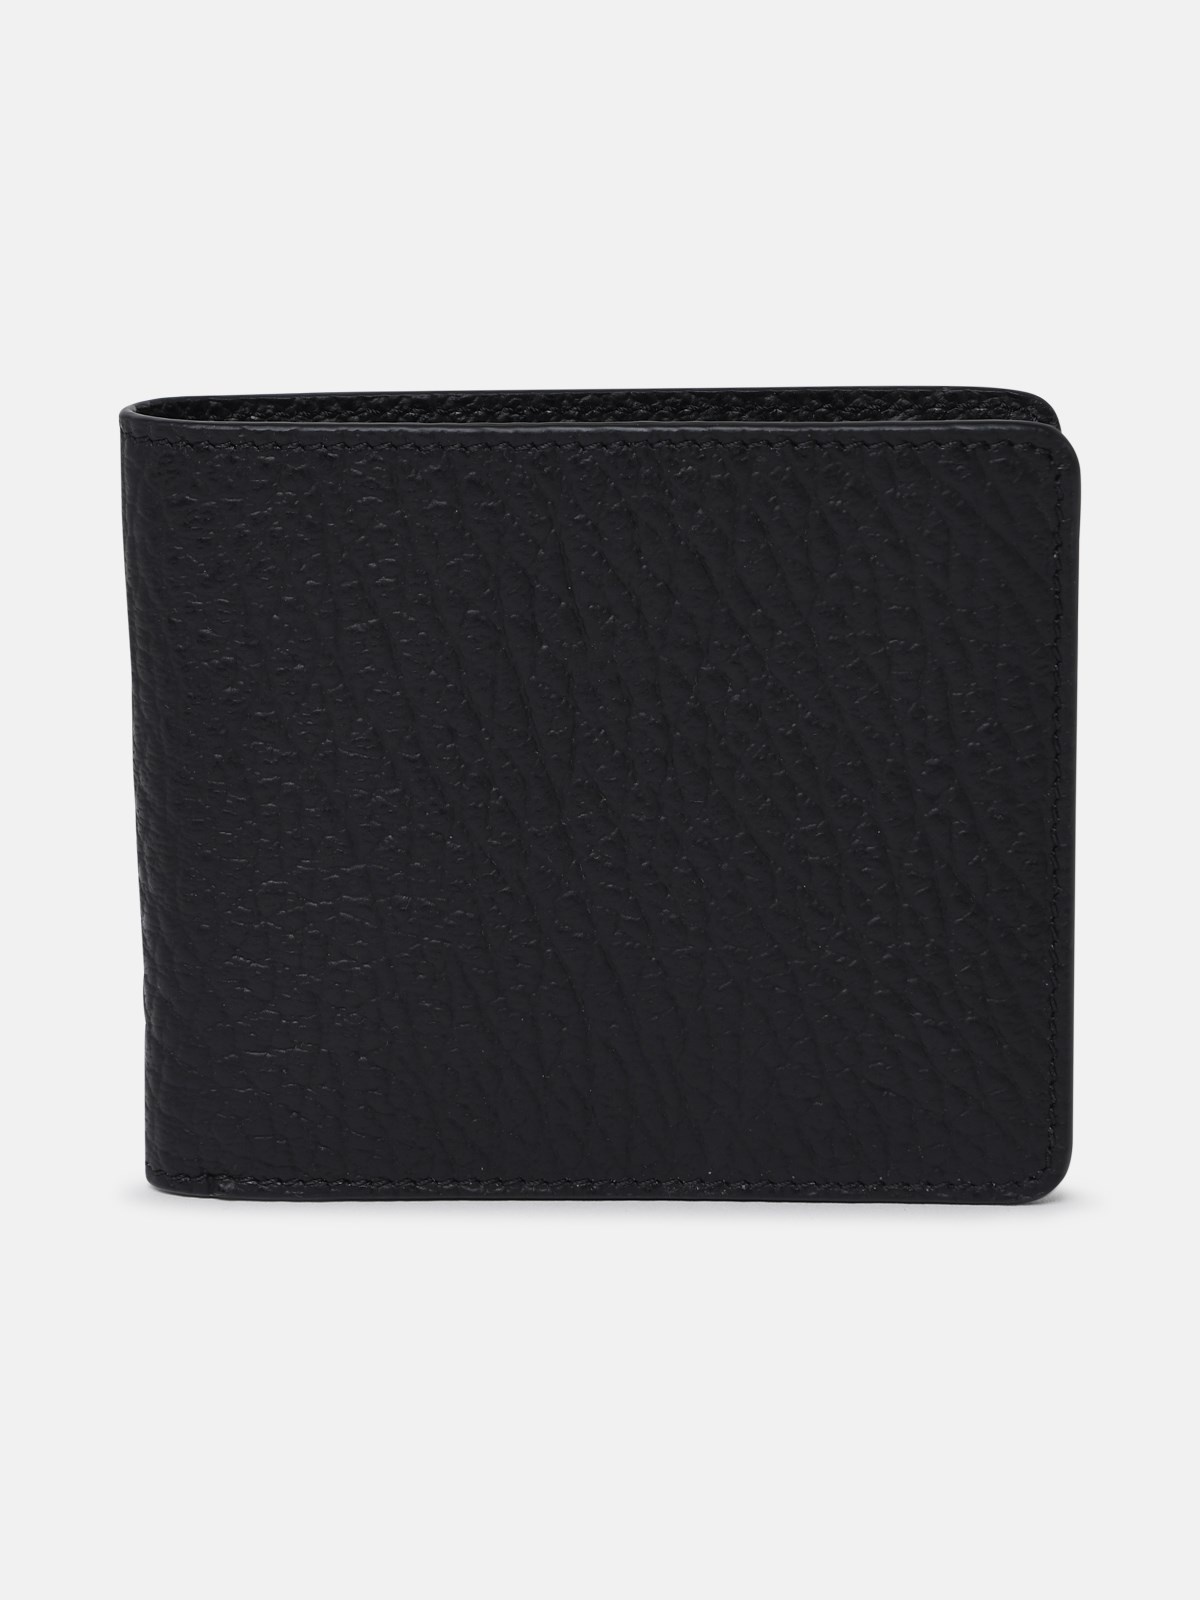 Four Stitches black embossed leather wallet - 1